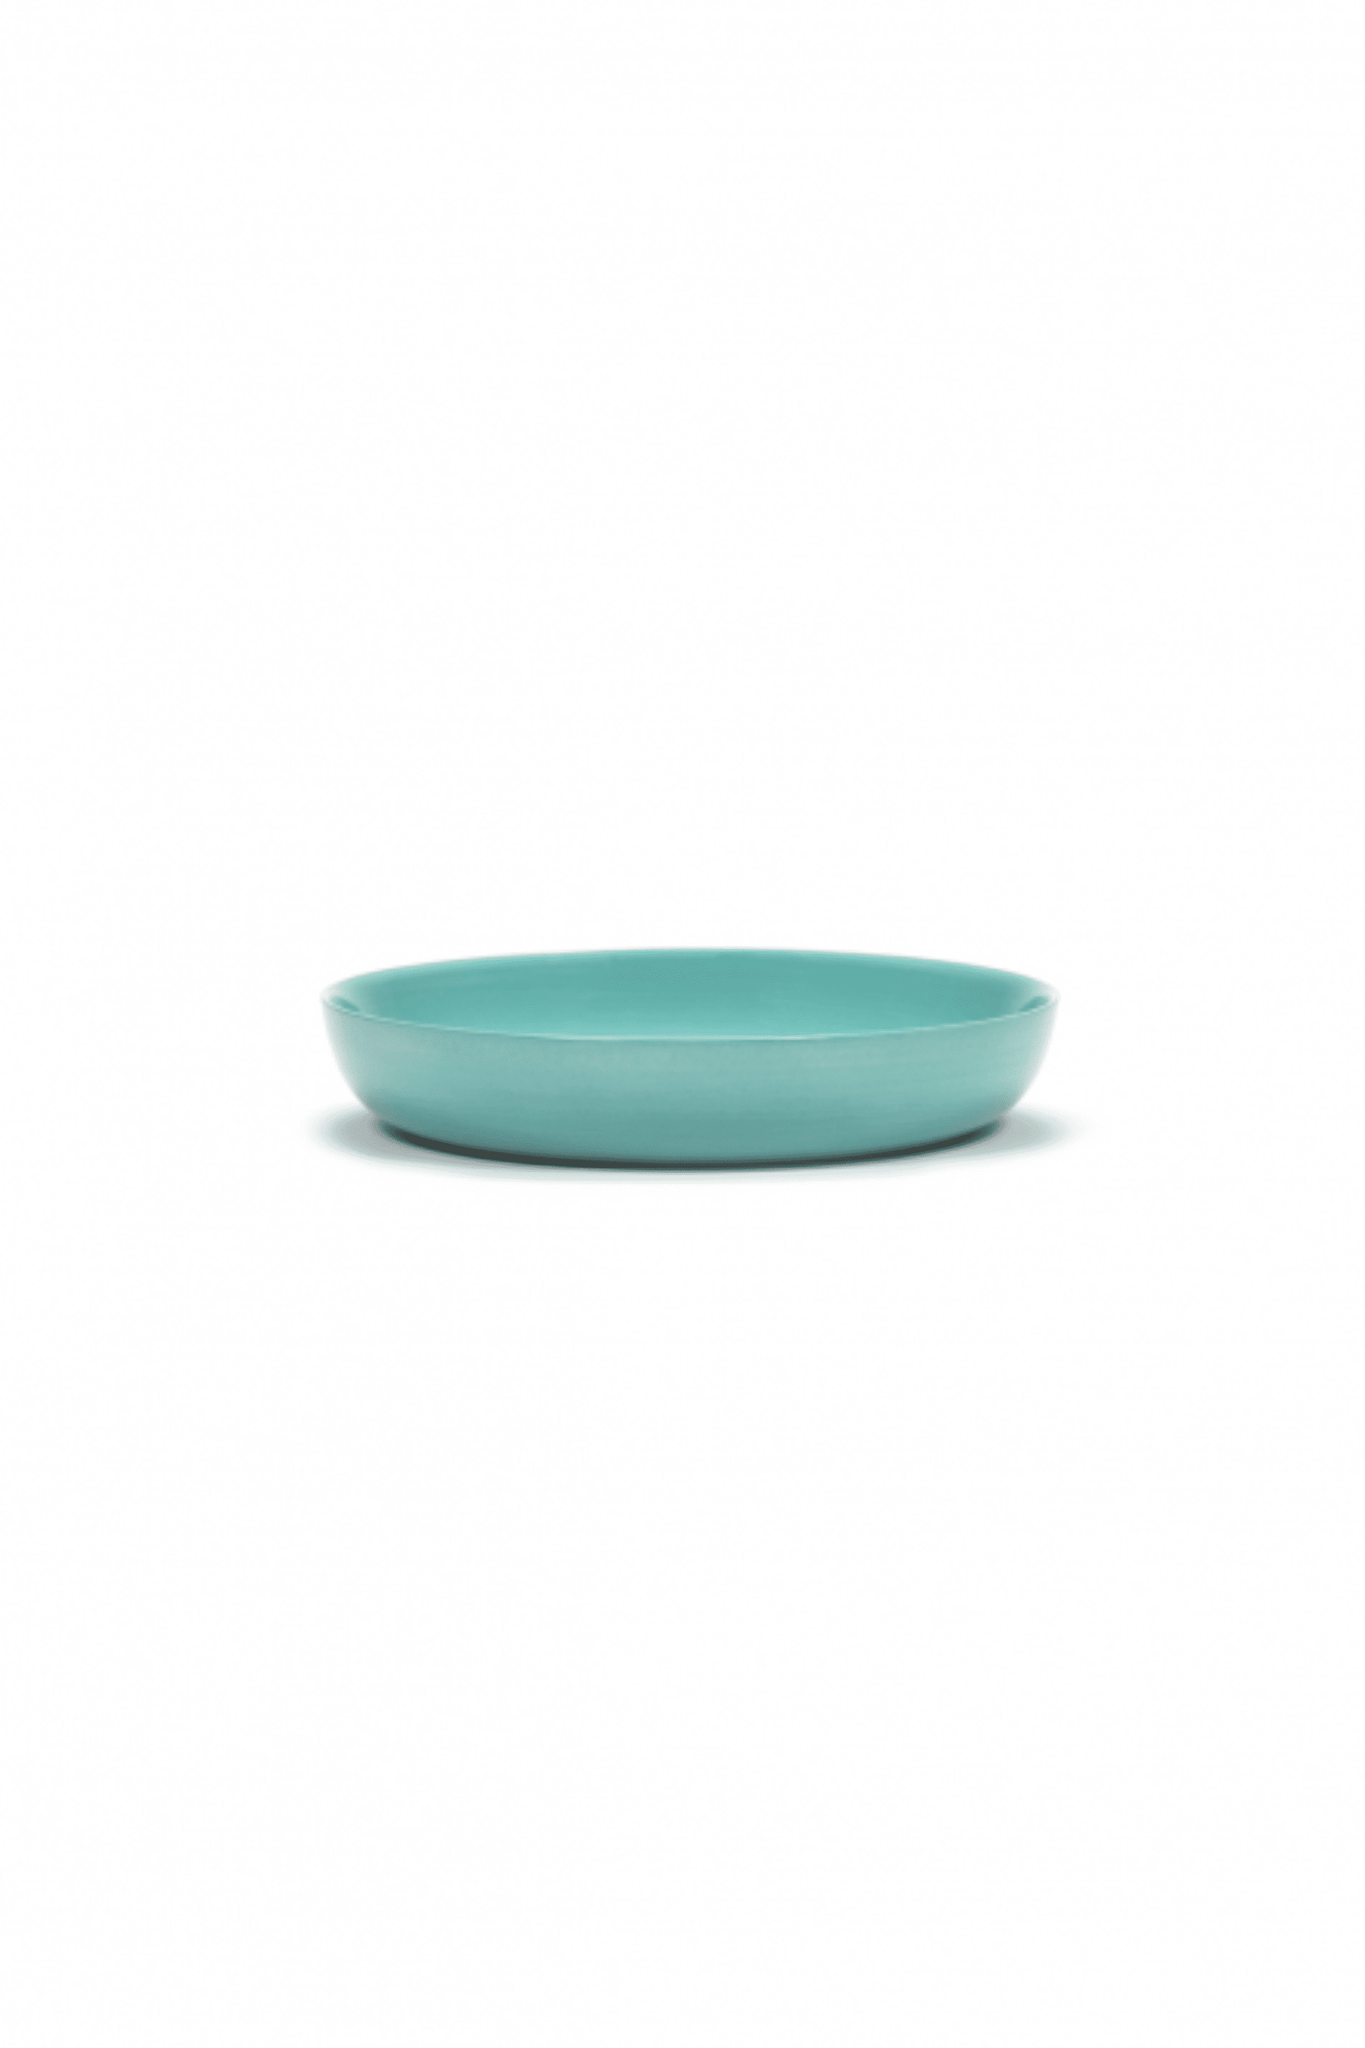 Set of 2 High Plates, Azure with Green Artichoke Ottolenghi Serax, front view